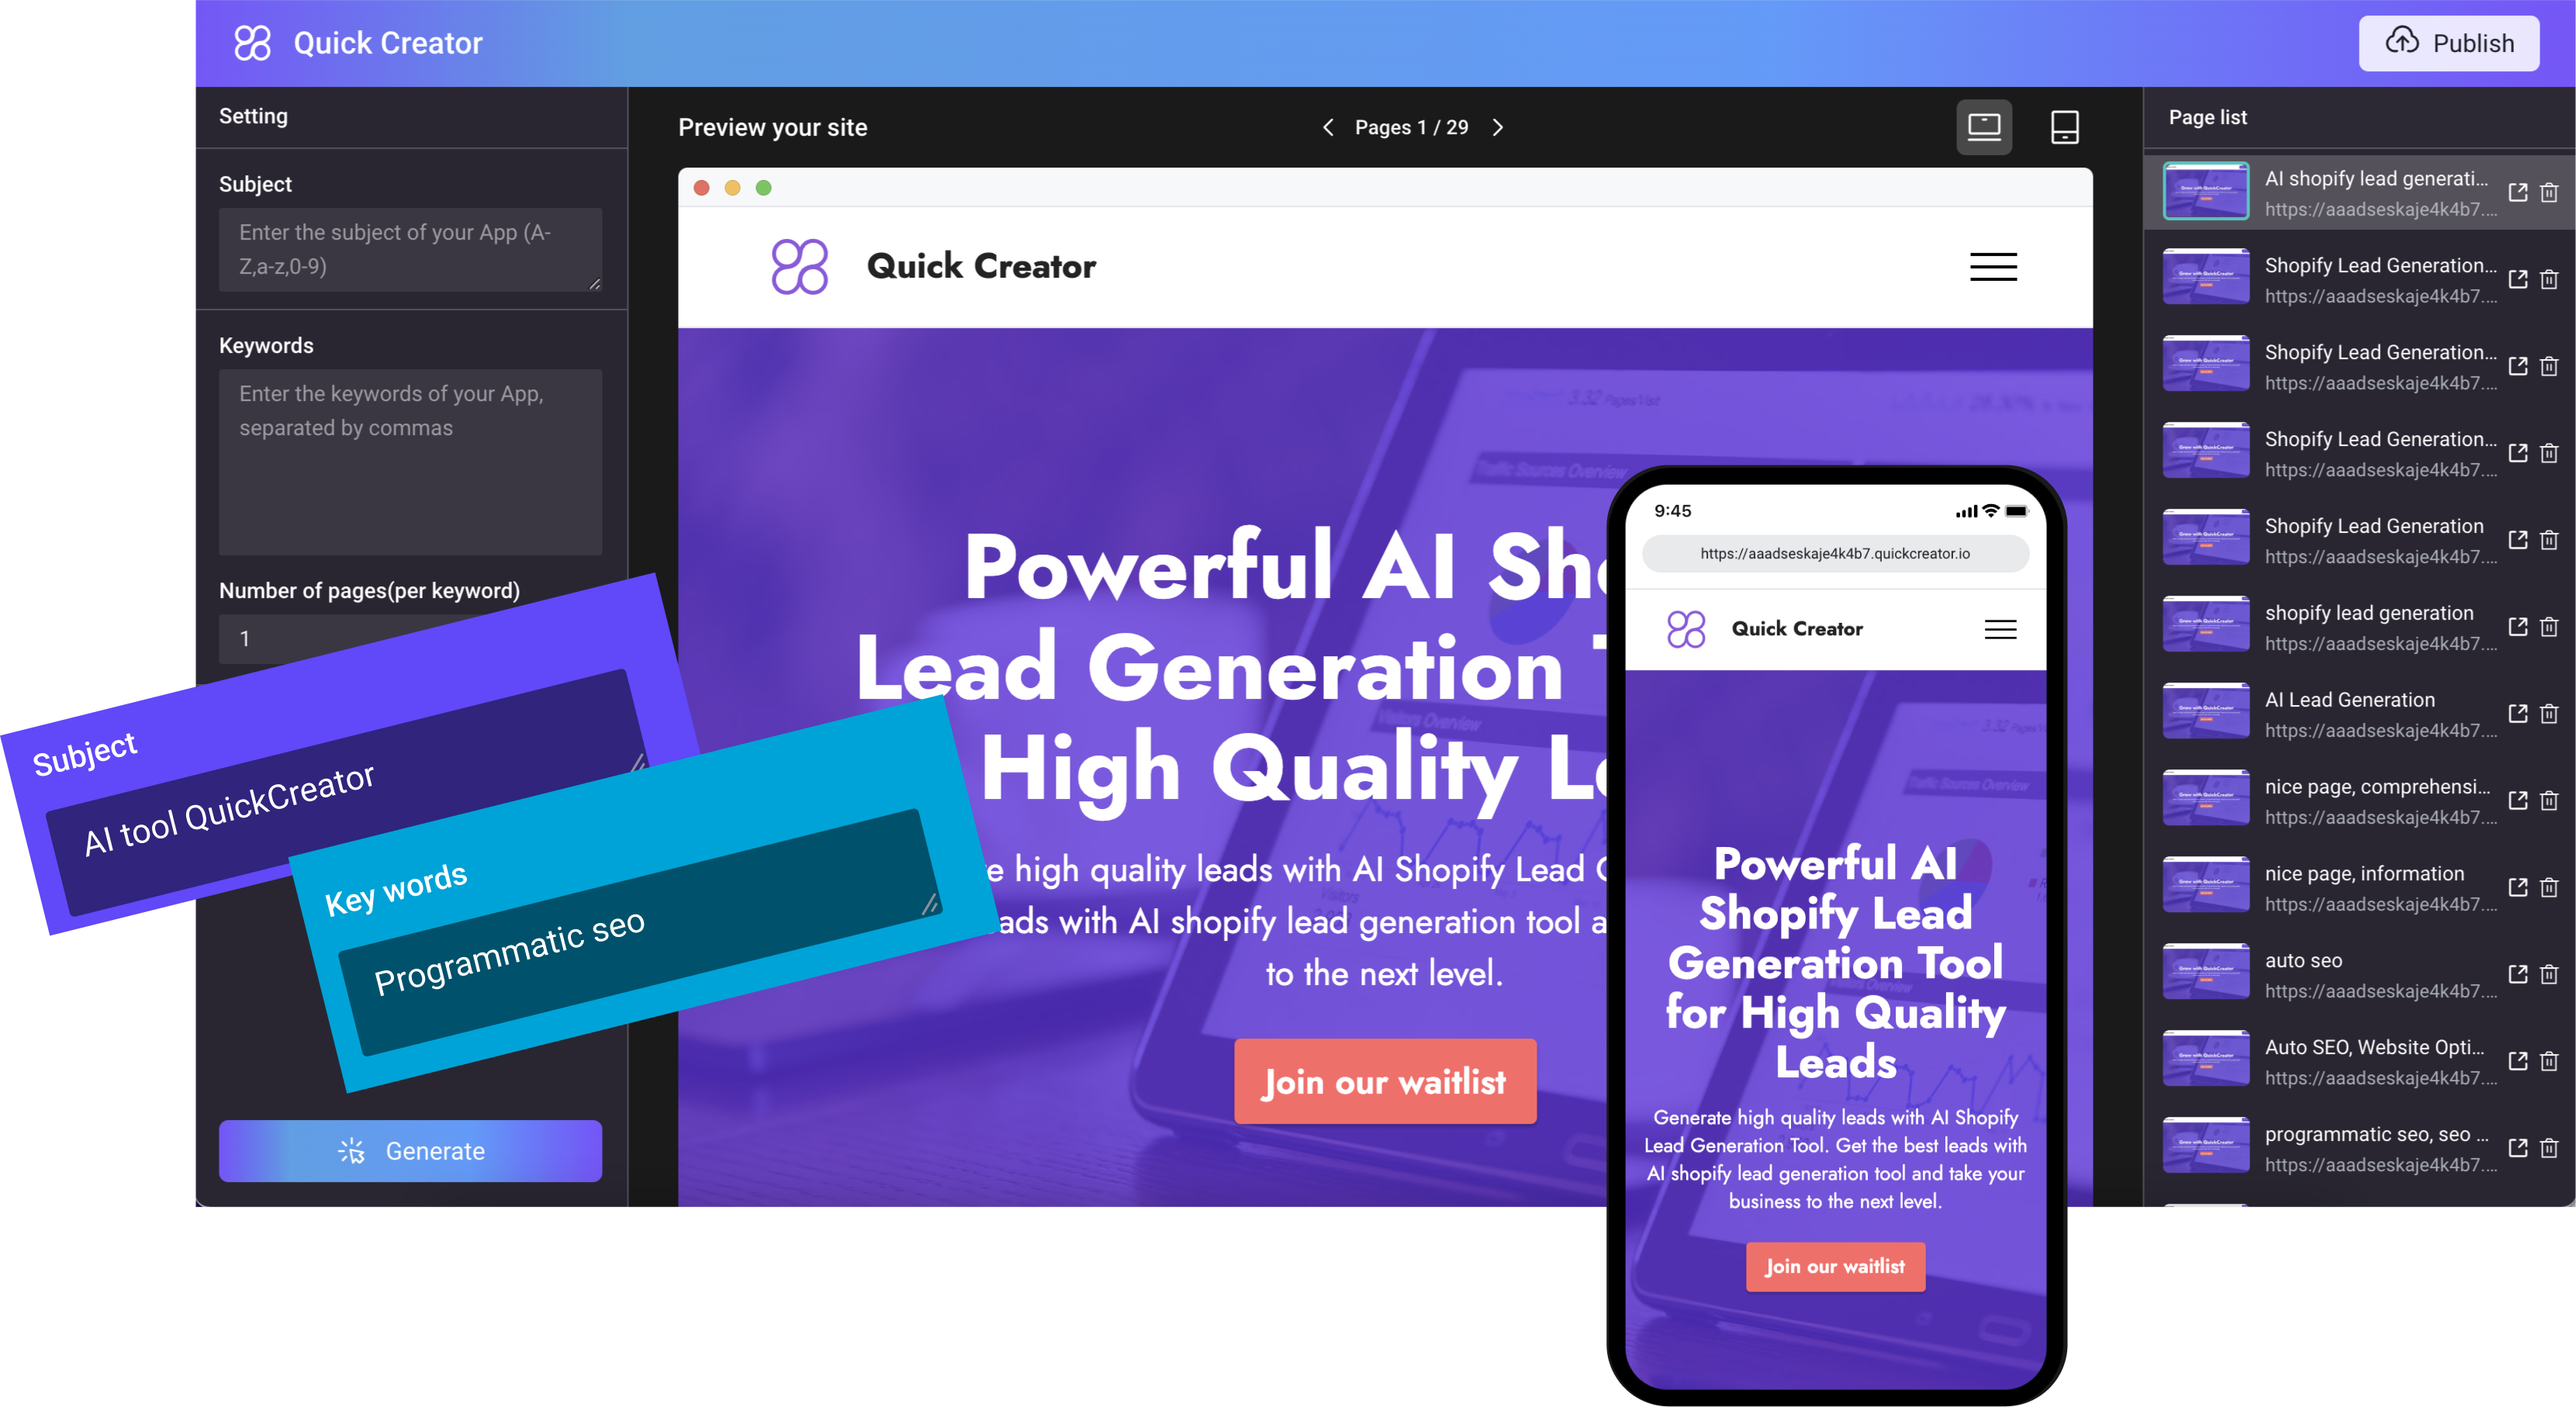 Creating Custom Landing Pages for Every Ad with Quick Creator